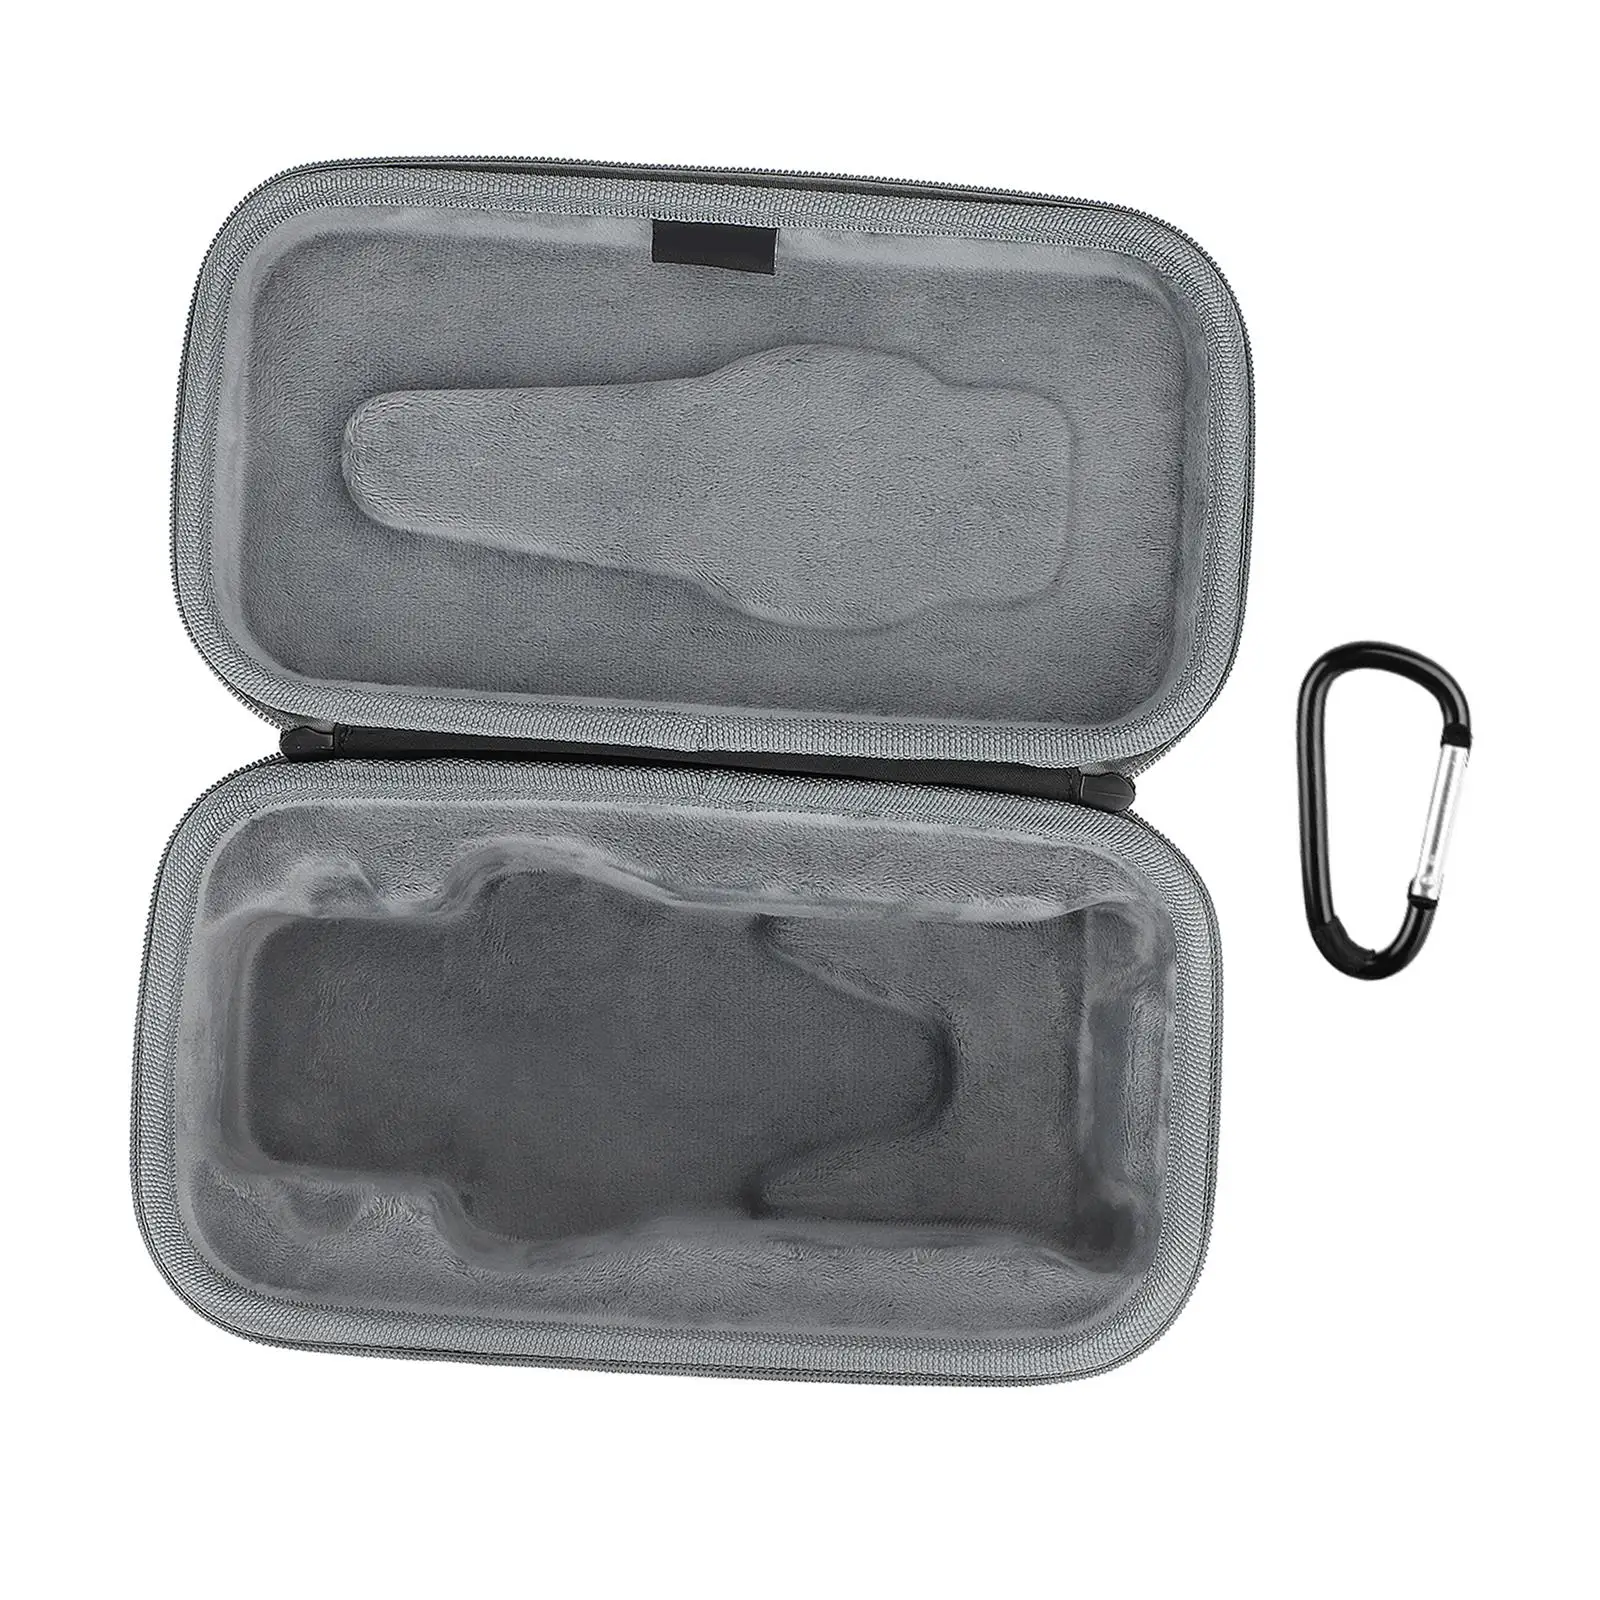 Carrying Case Dustproof with Carabiner Portable Travel Bag for Mavic 3 Pro Mavic 3 Mavic 3 Classic Quadcopter Remote Controller